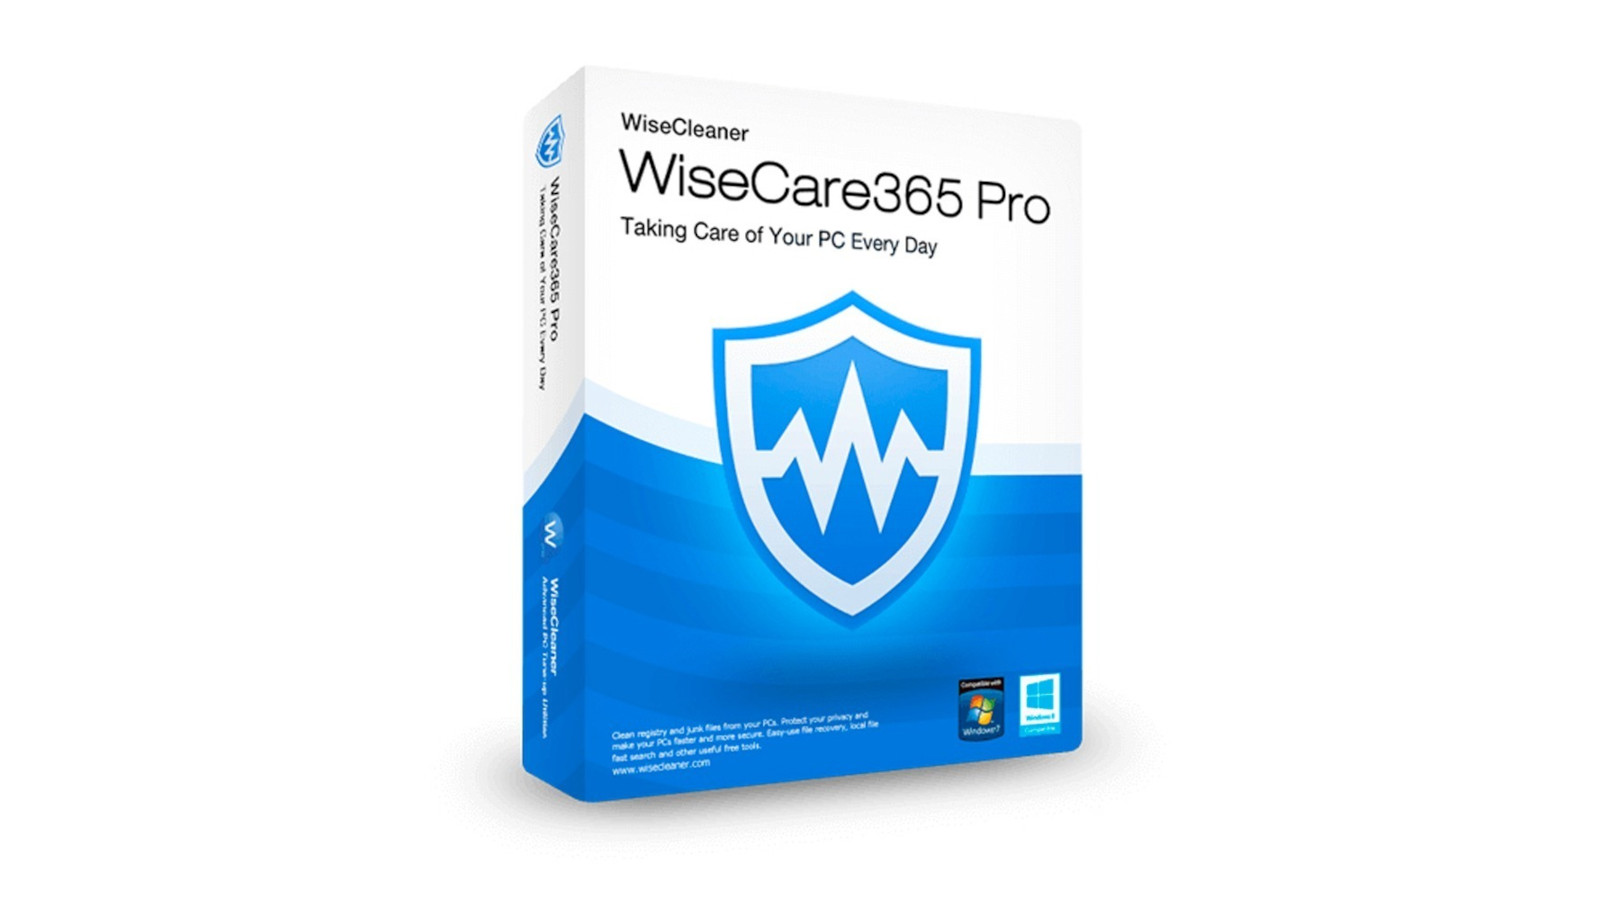 Wise Care 365 PRO CD Key (1 Year / 1 PC) 18.05 $